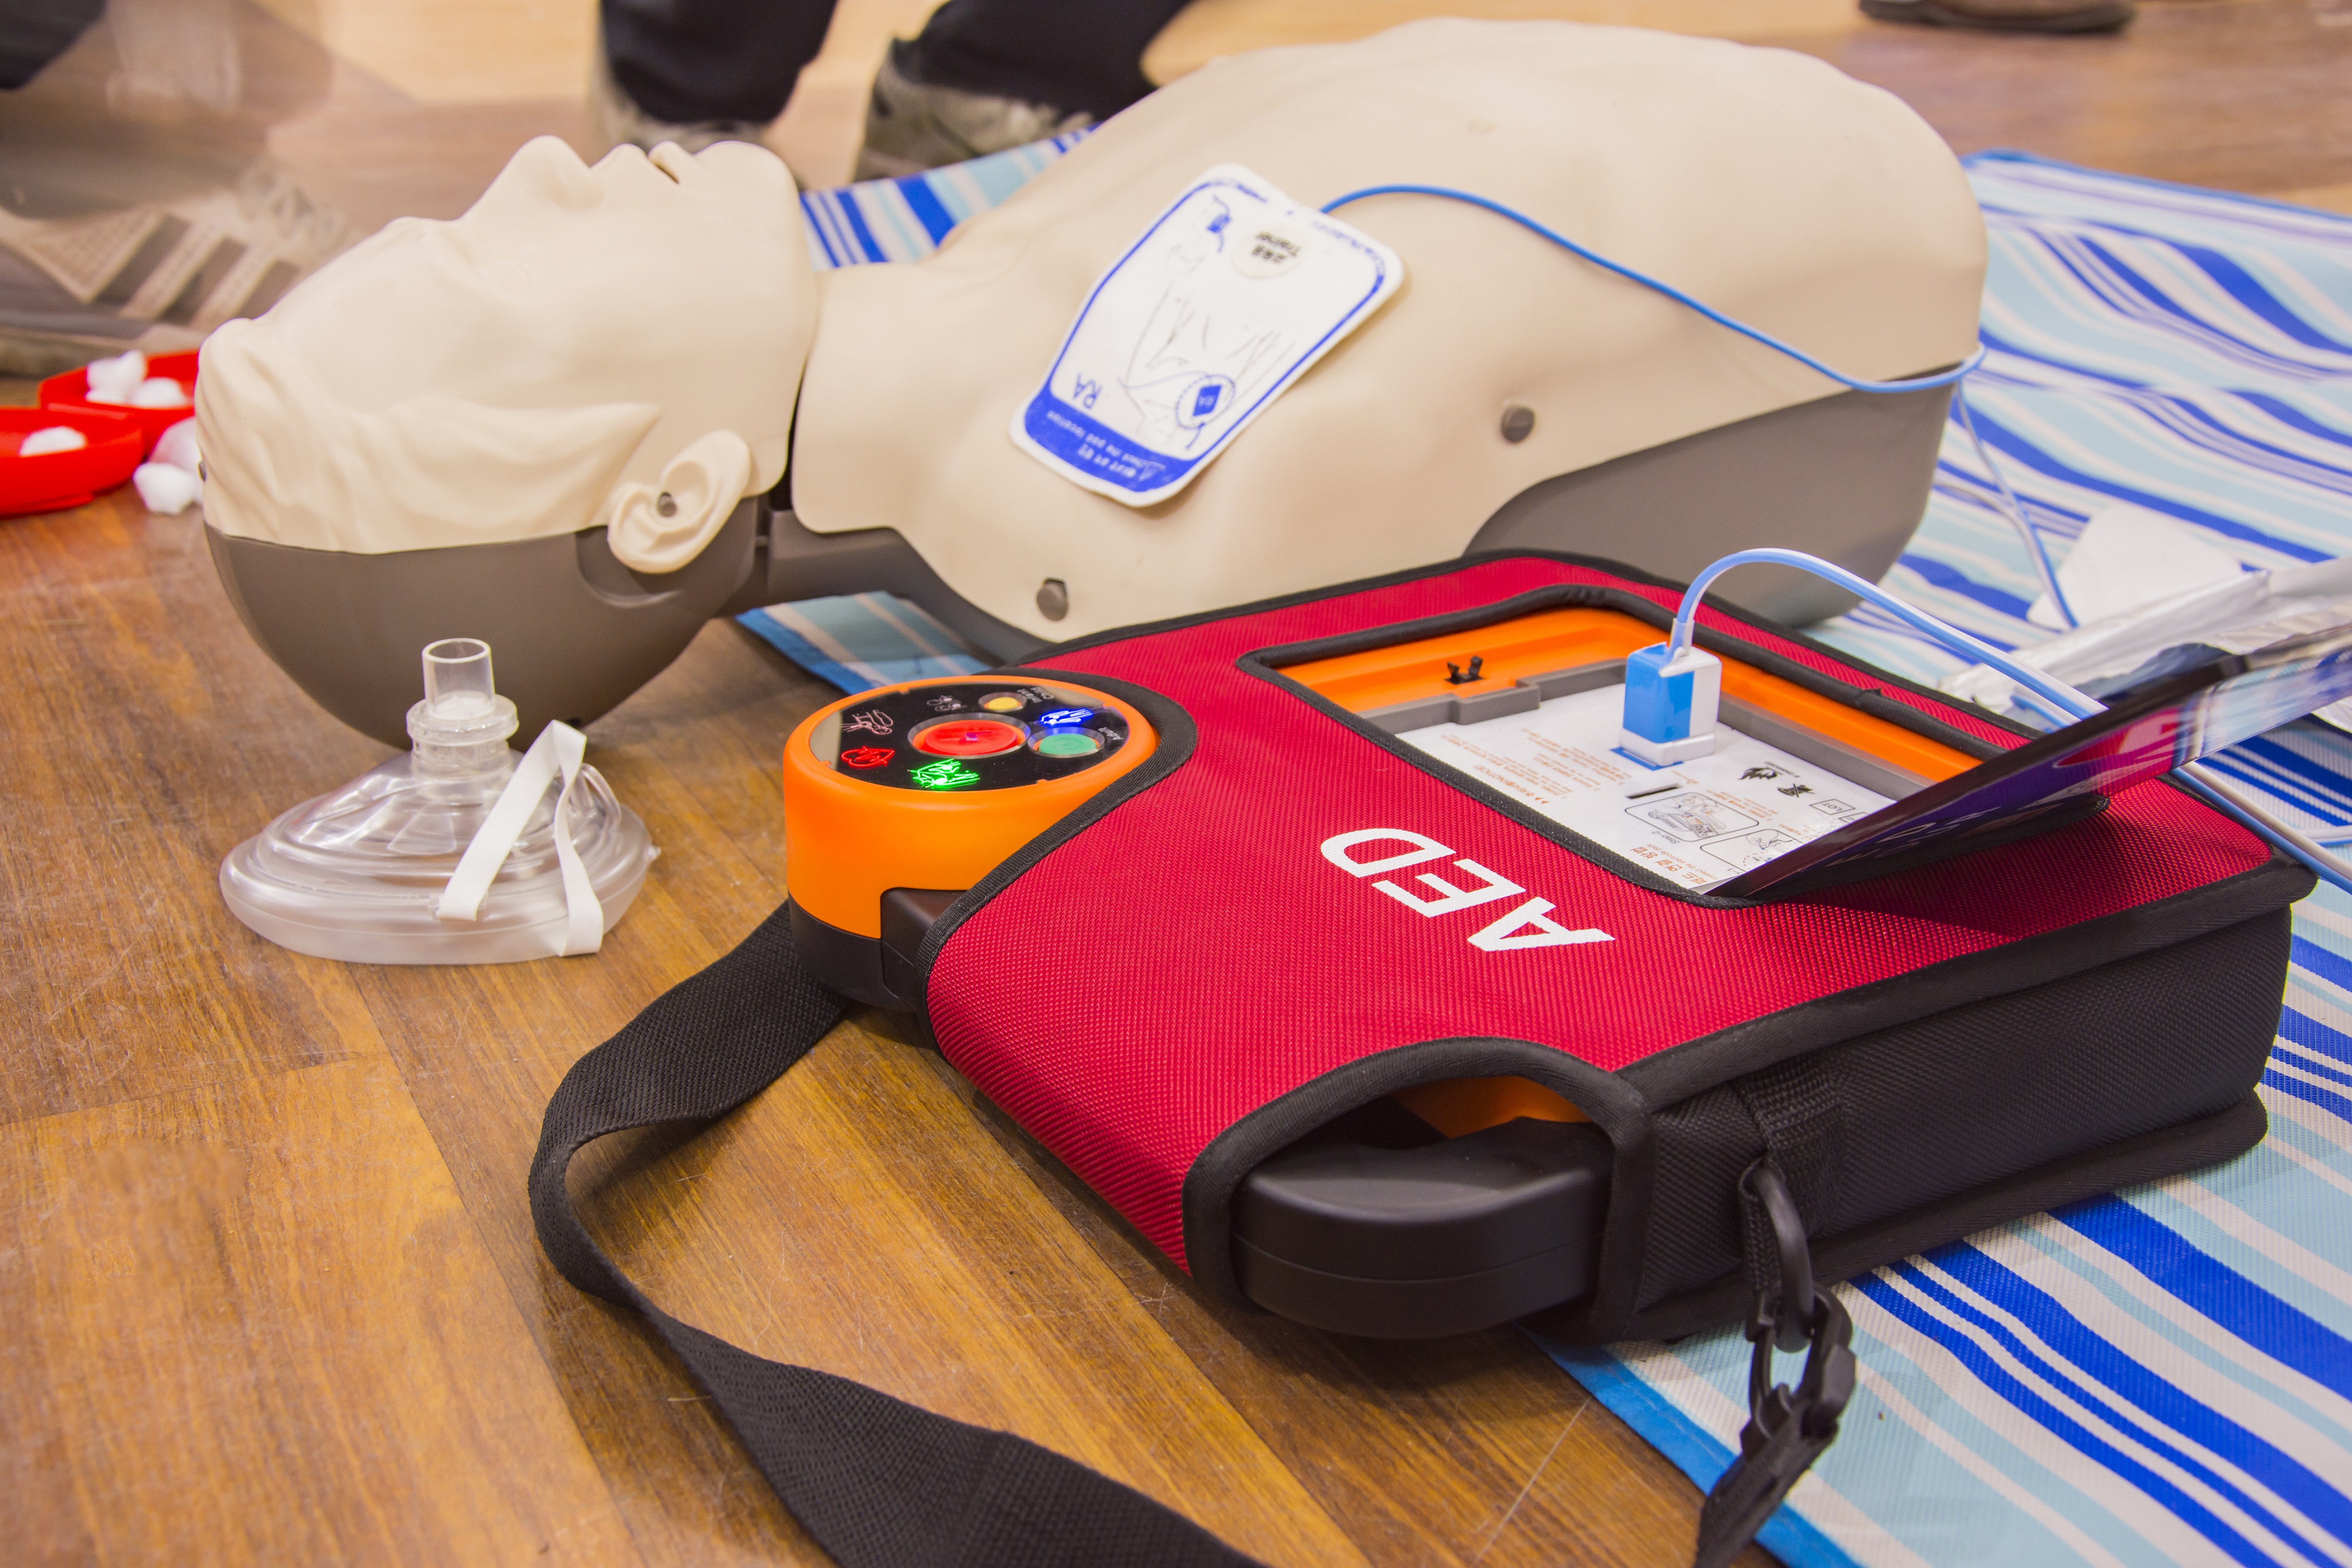  CPR AED First Aid Training Class February 12, 2022 in Salem